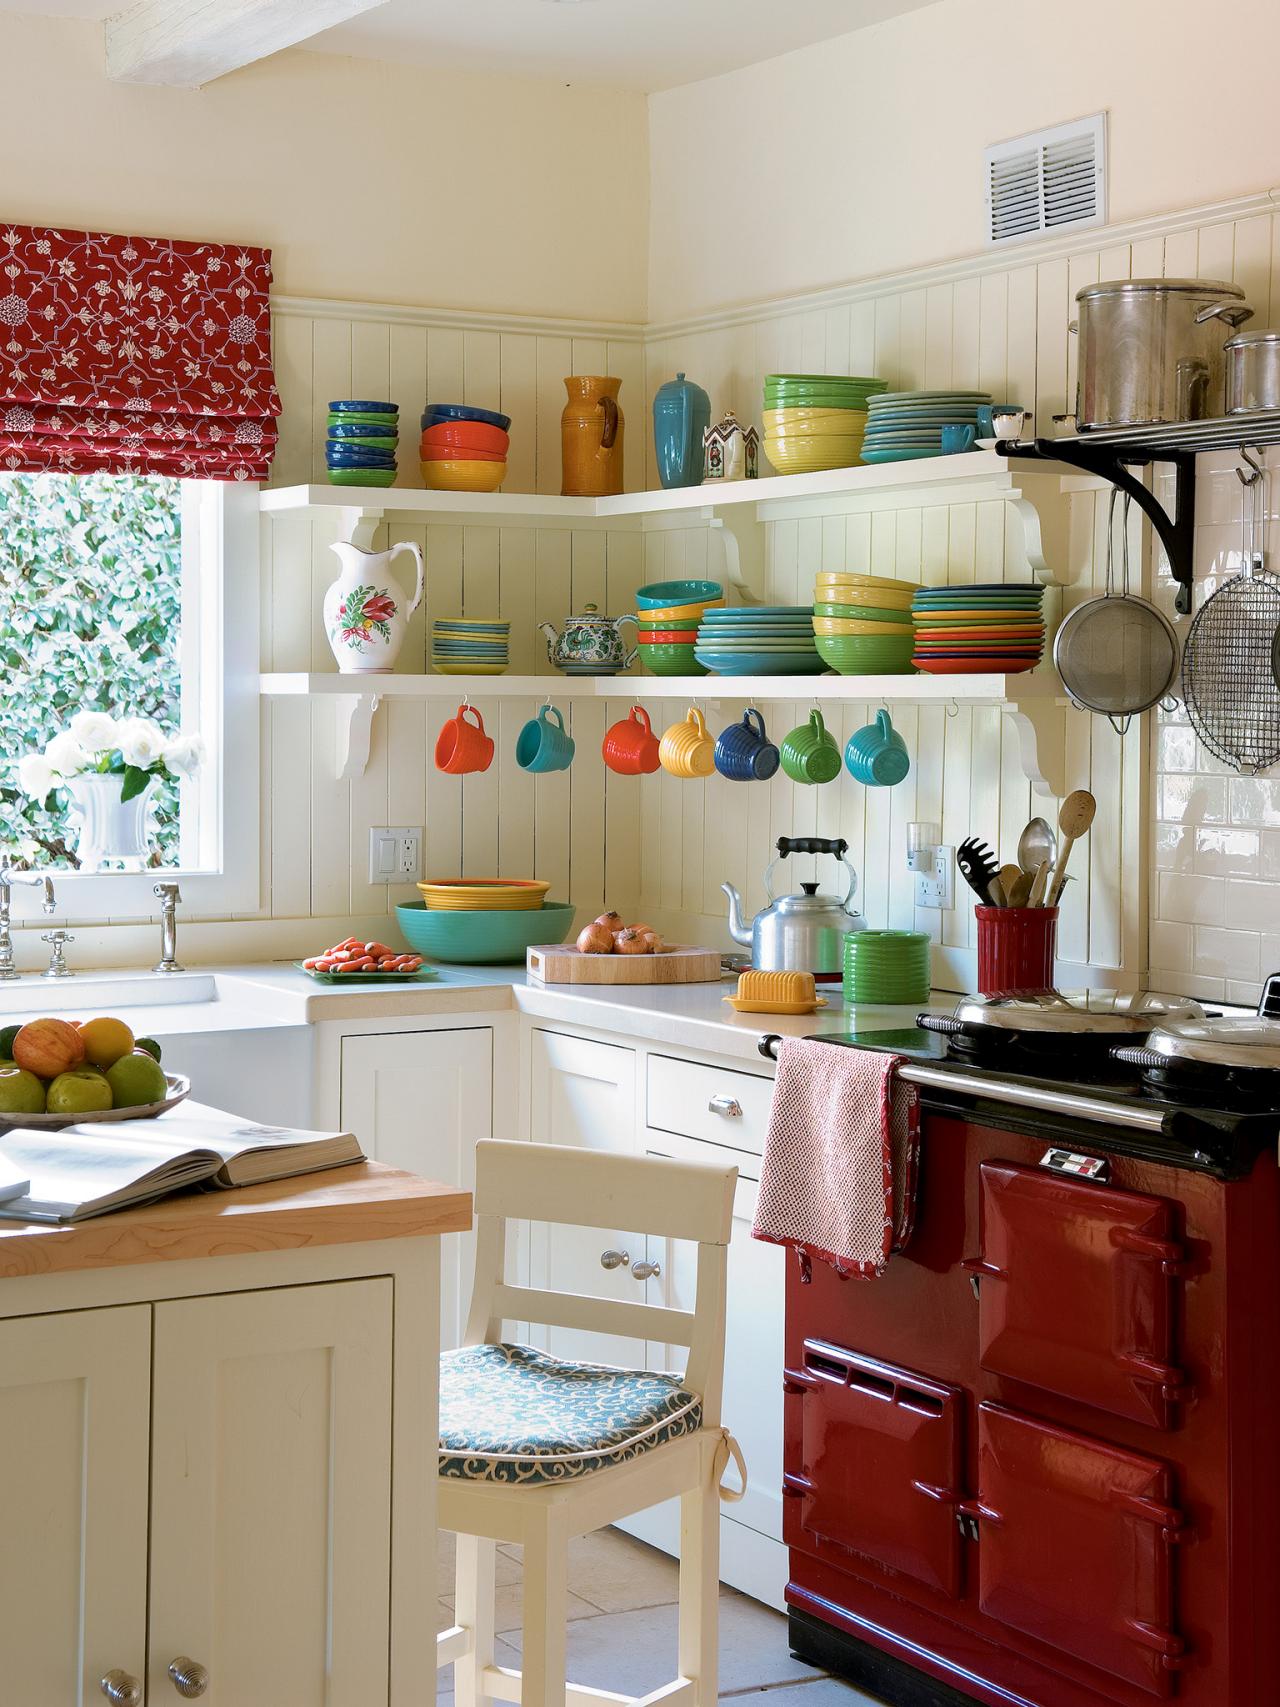 50 best small kitchen ideas and designs for 2020